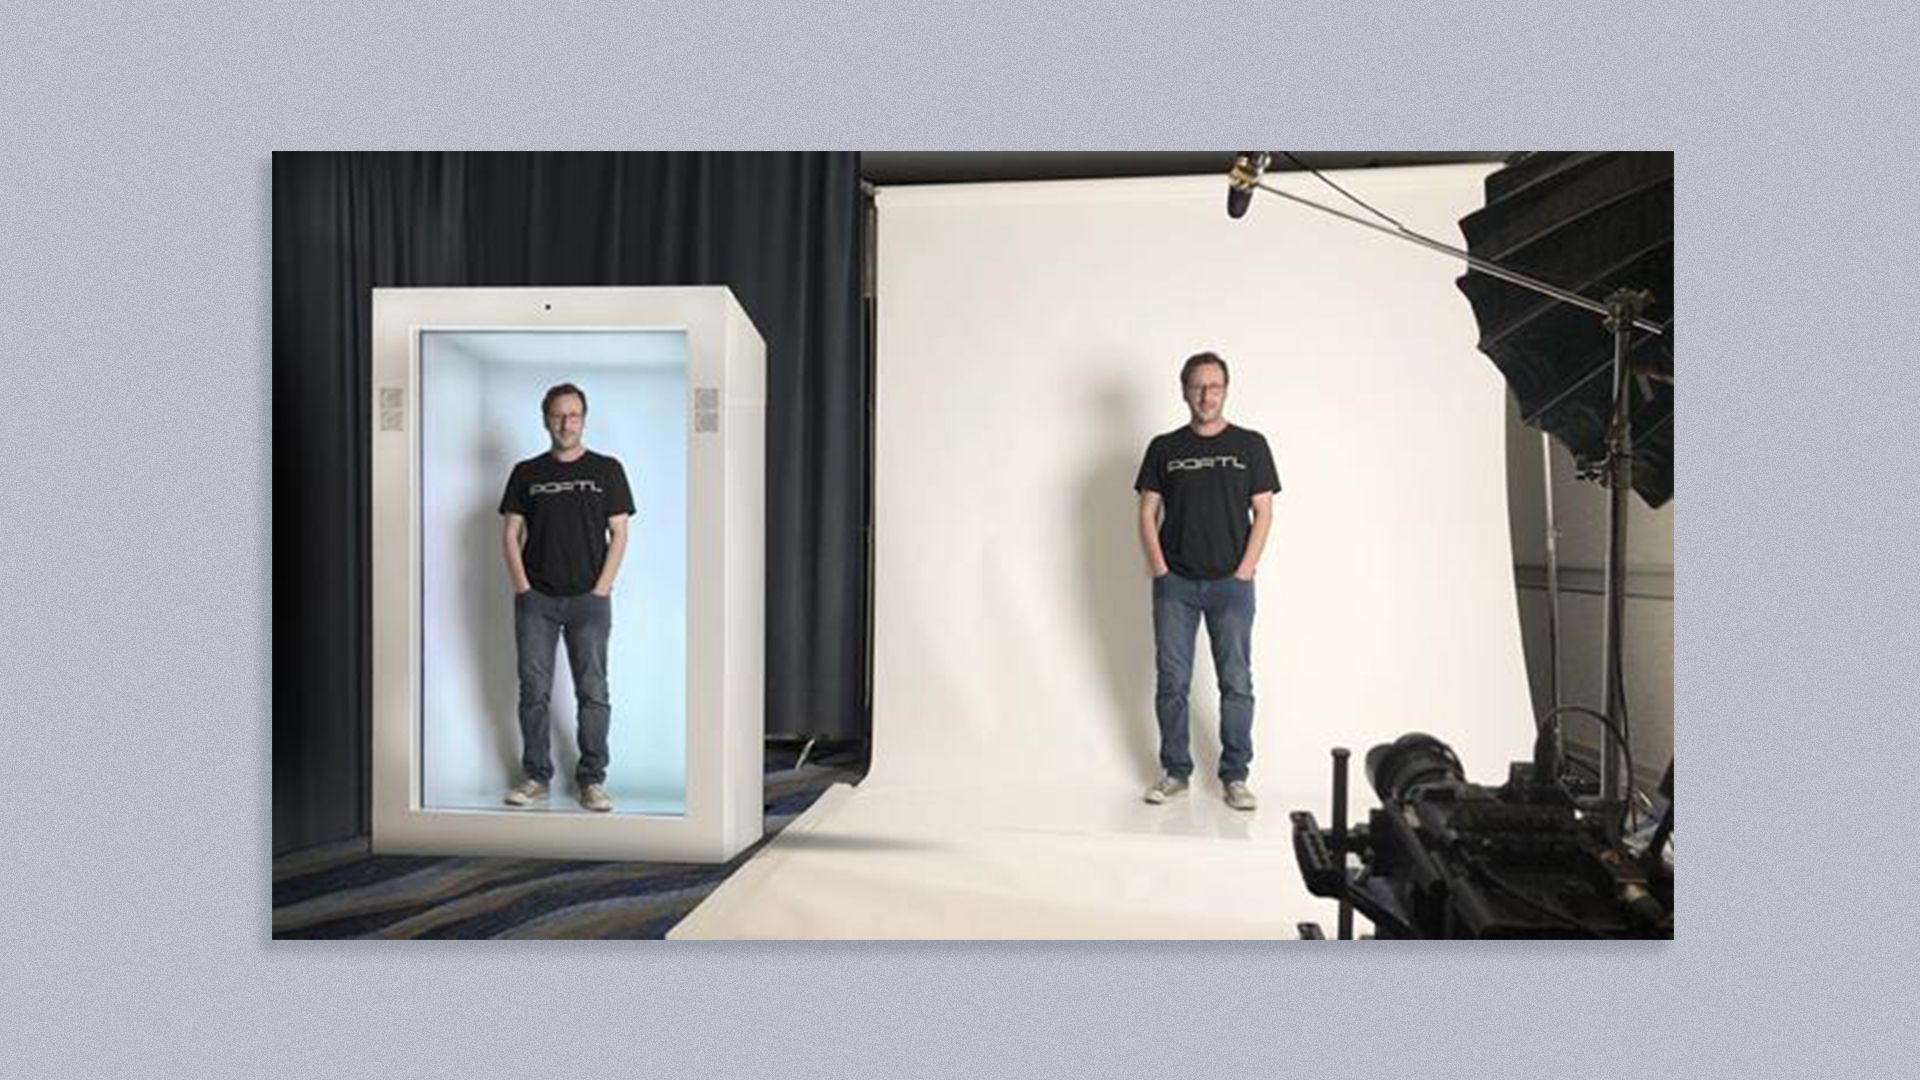 David Nussbaum, CEO of PORL, is shown breaming an image of himself into a PORTL holographic booth.